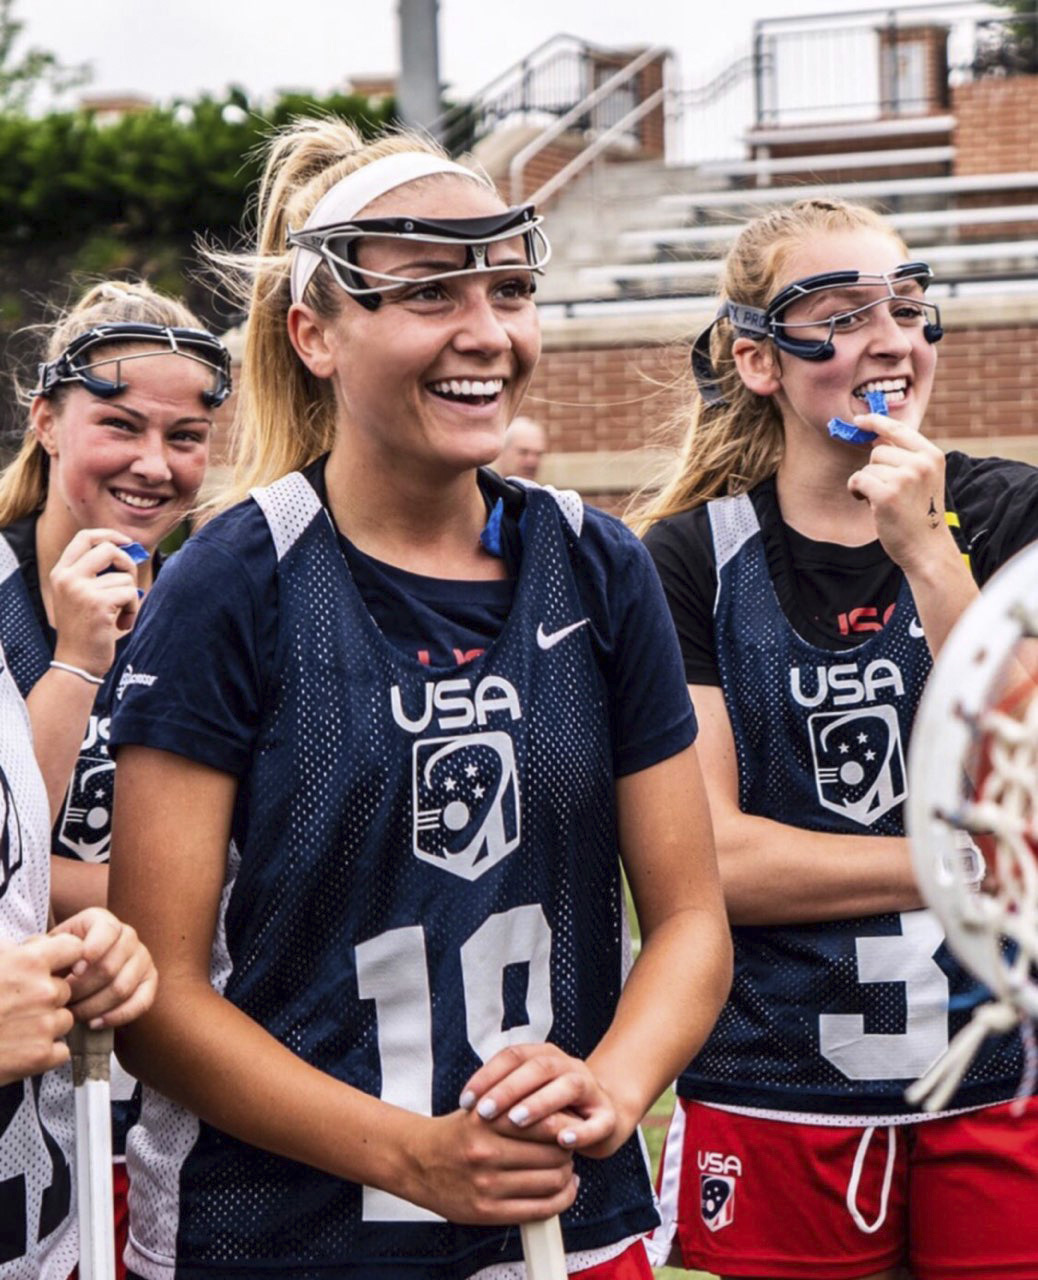 A Dream Come True 
June 20 -- Isabelle Smith of Westhampton Beach endured a 10-month process of trying out for the U.S. Lacrosse U19 team. Smith was named to the final squad and competed in the 2019 Federation of International Lacrosse (FIL) Women’s U19 World Championship in August in Peterborough, Ontario, Canada.